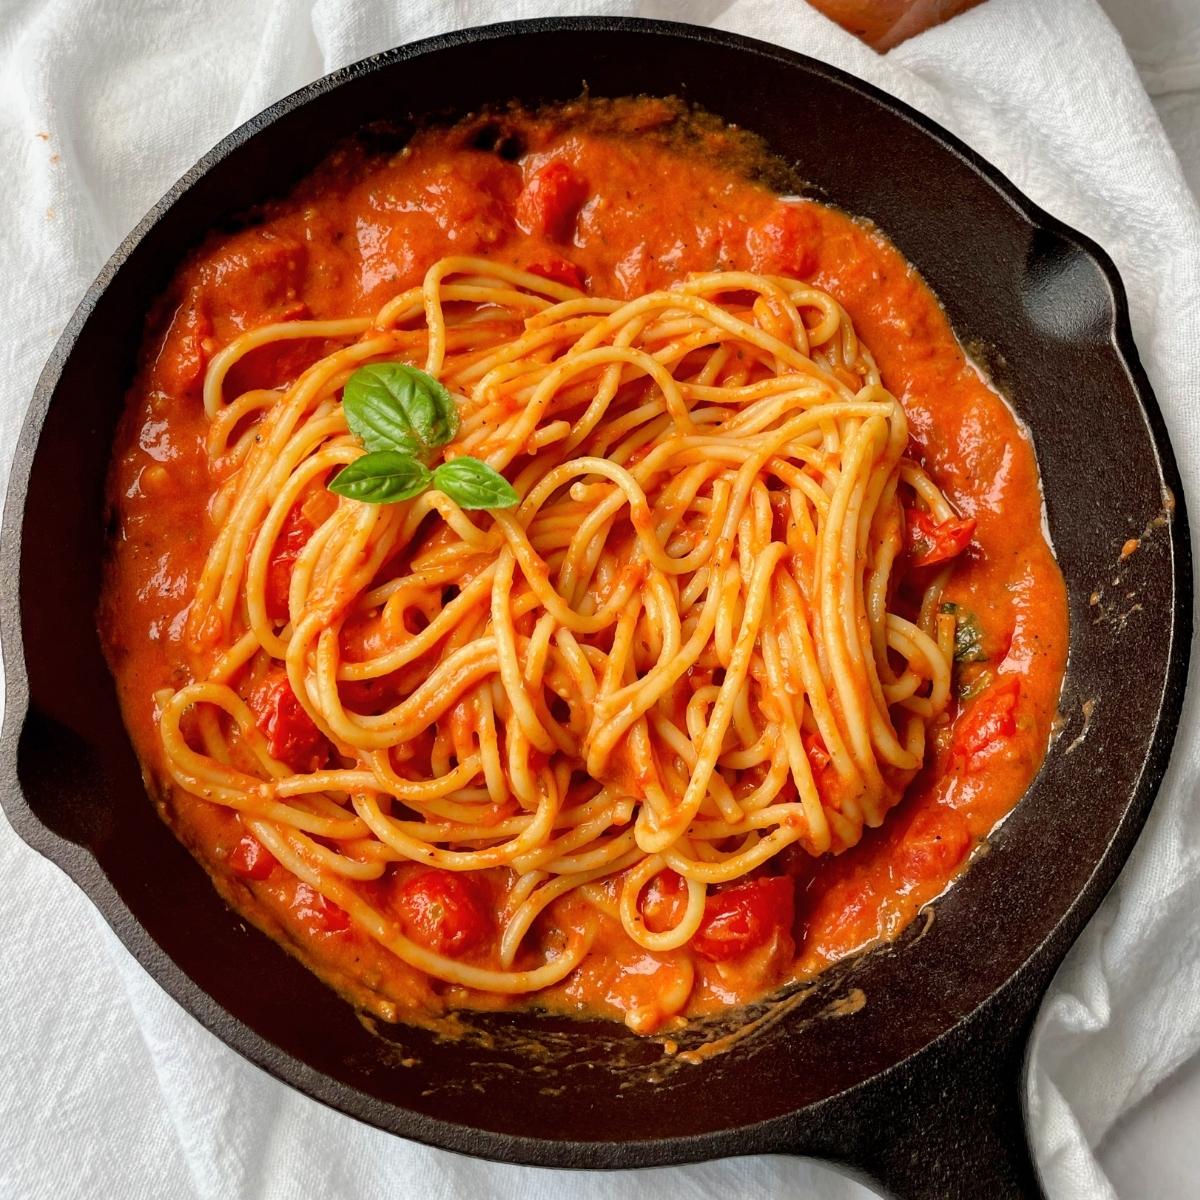 Pan with cherry tomato sauce and pasta.